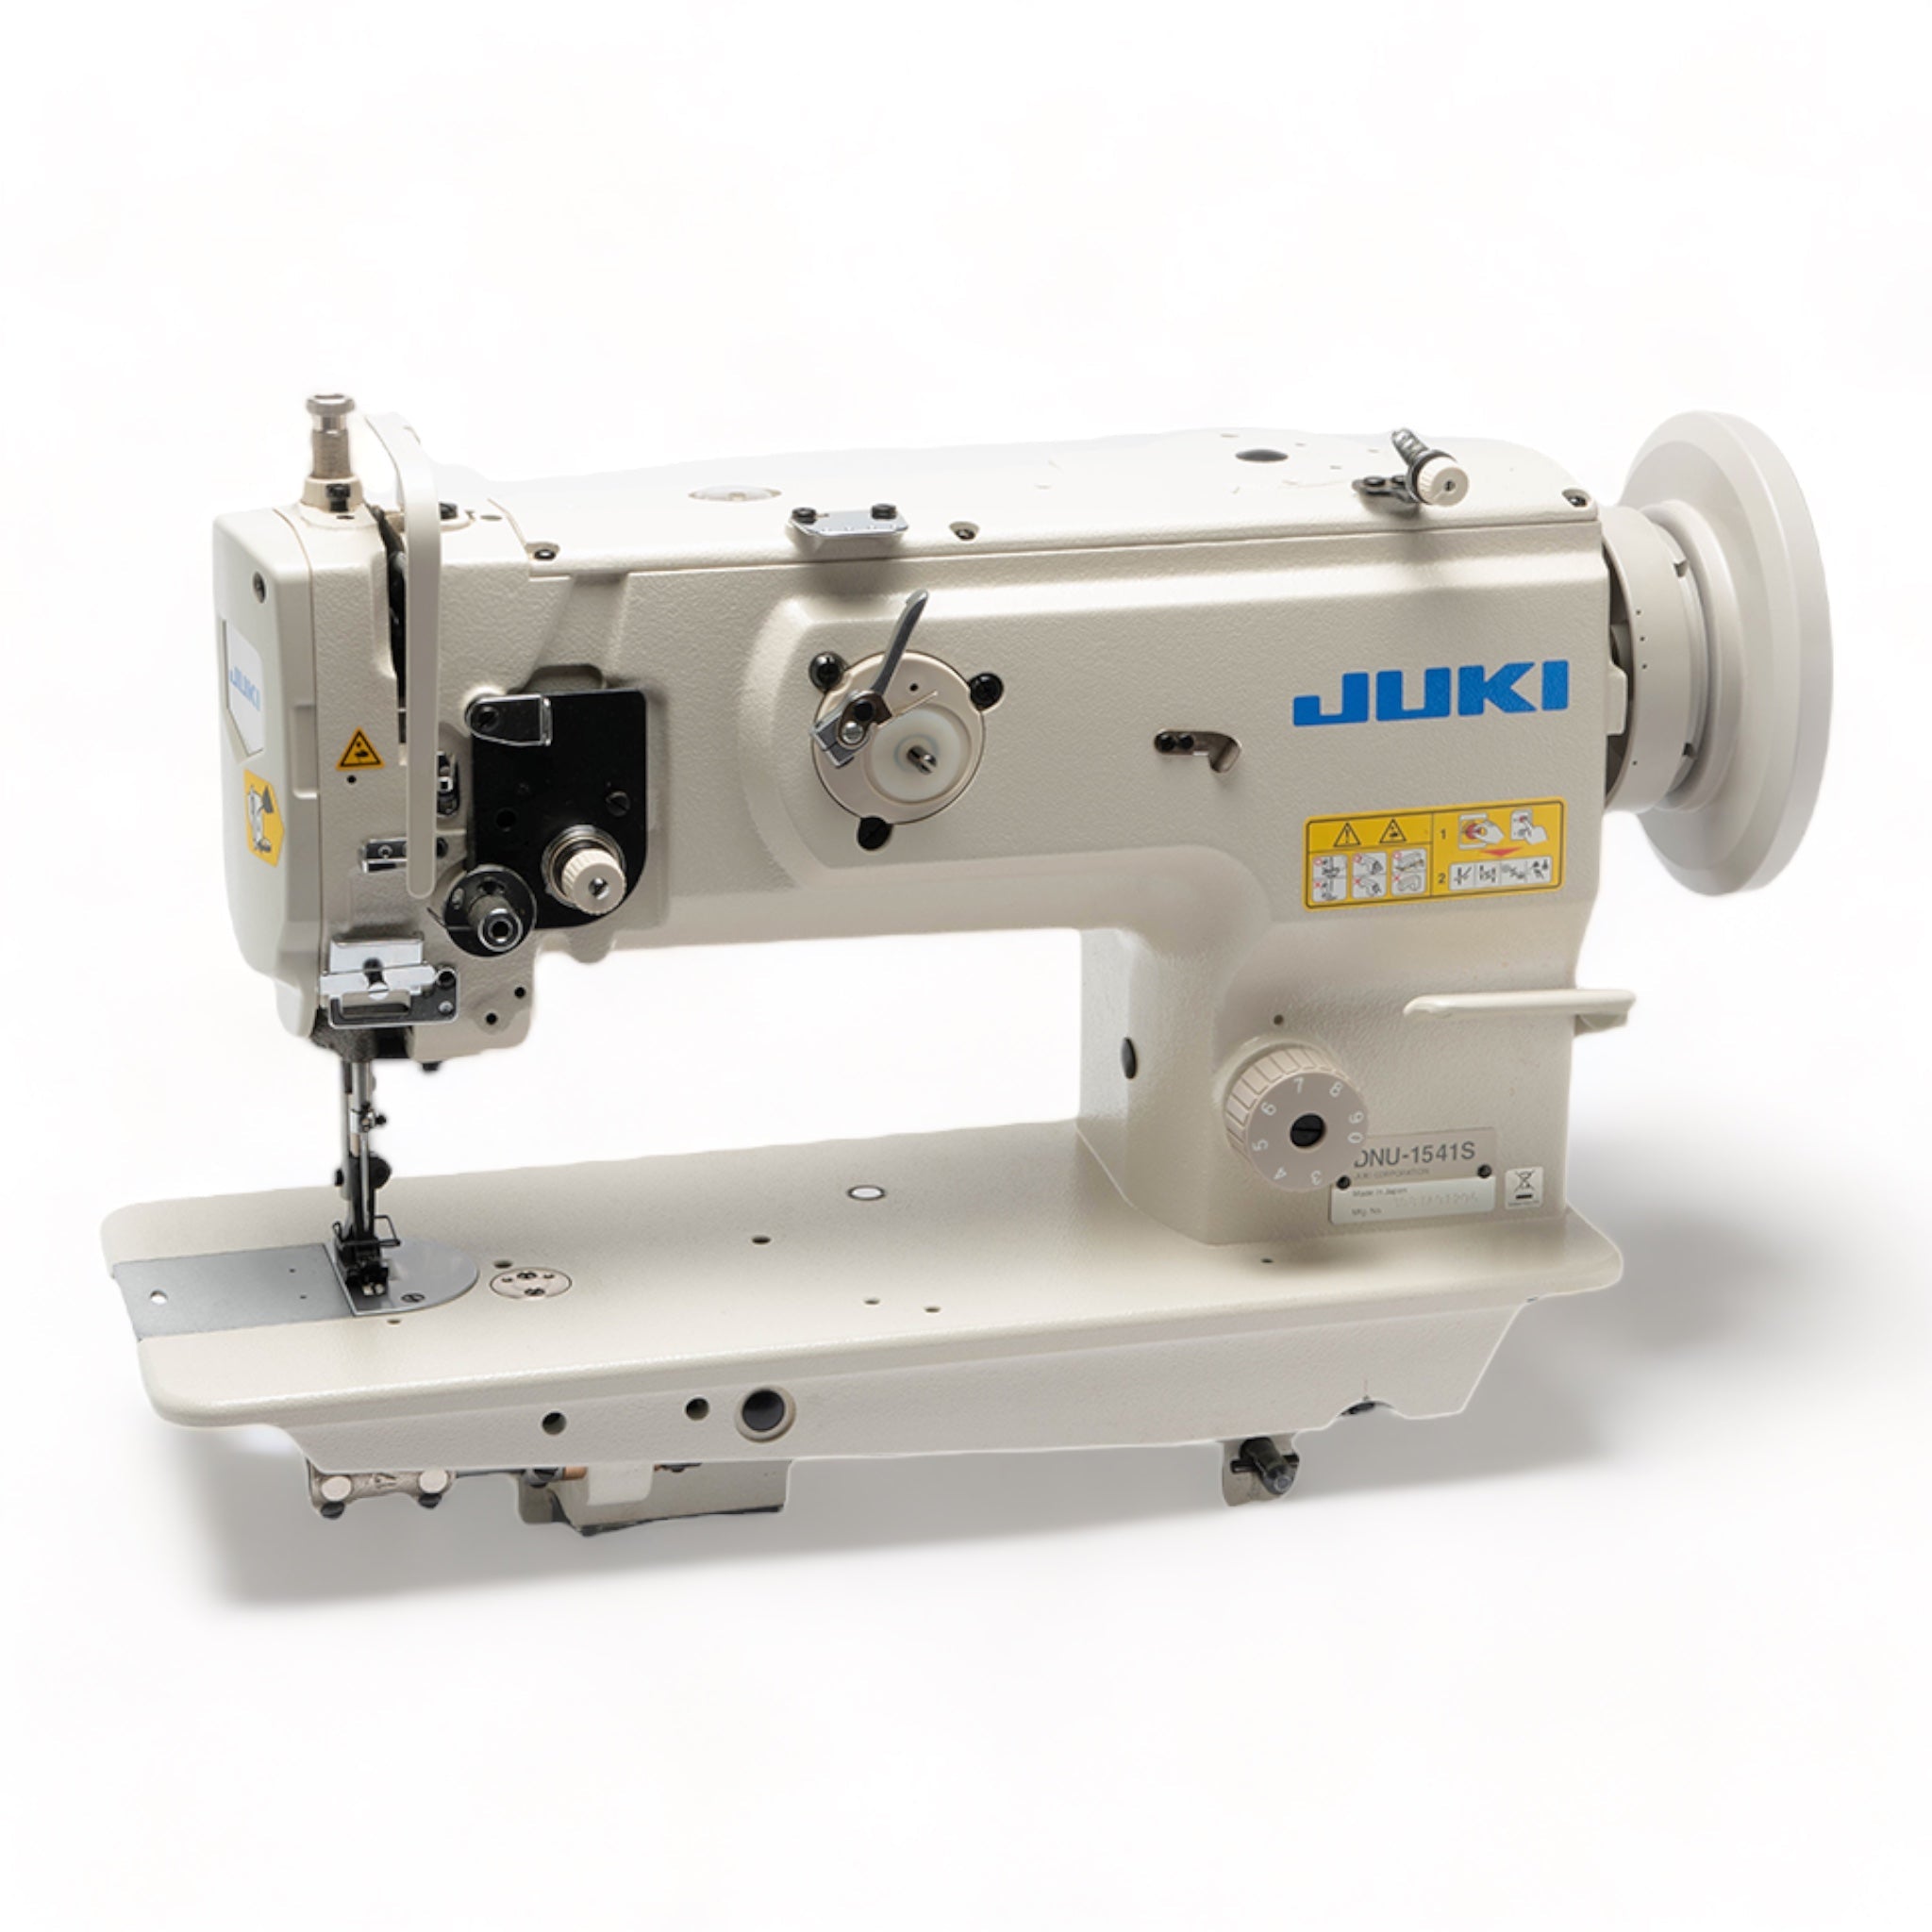 JUKI DNU-1541 Single Needle Heavy Duty Unison Feed Walking Foot Sewing Machine Assembled with Servo Motor, Table and Stand Included